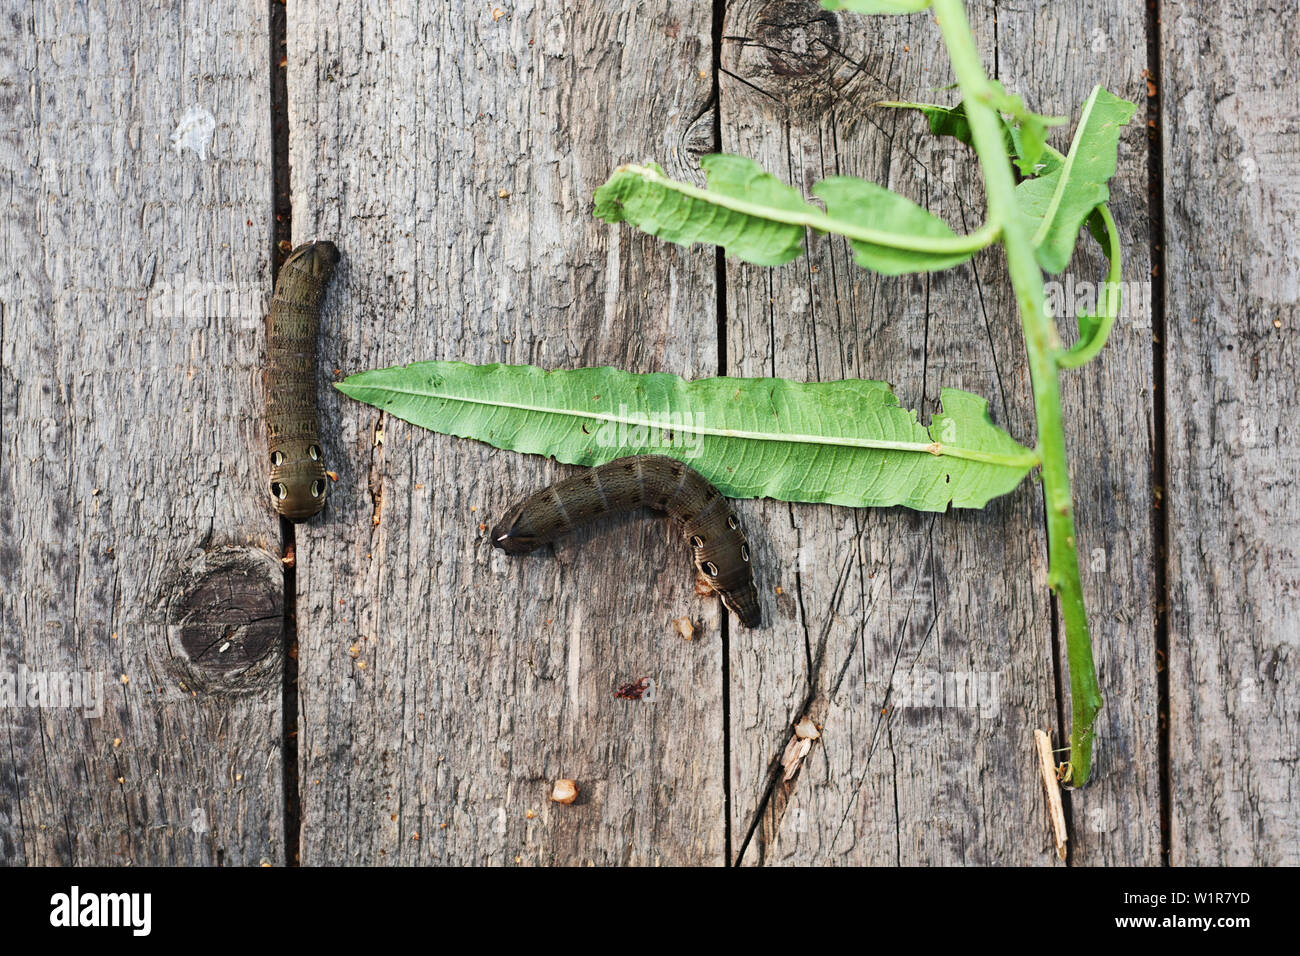 Two large caterpillars of Deilephila elpenor (elephant hawk moth) and  leaves of  fireweed on the wooden boards Stock Photo